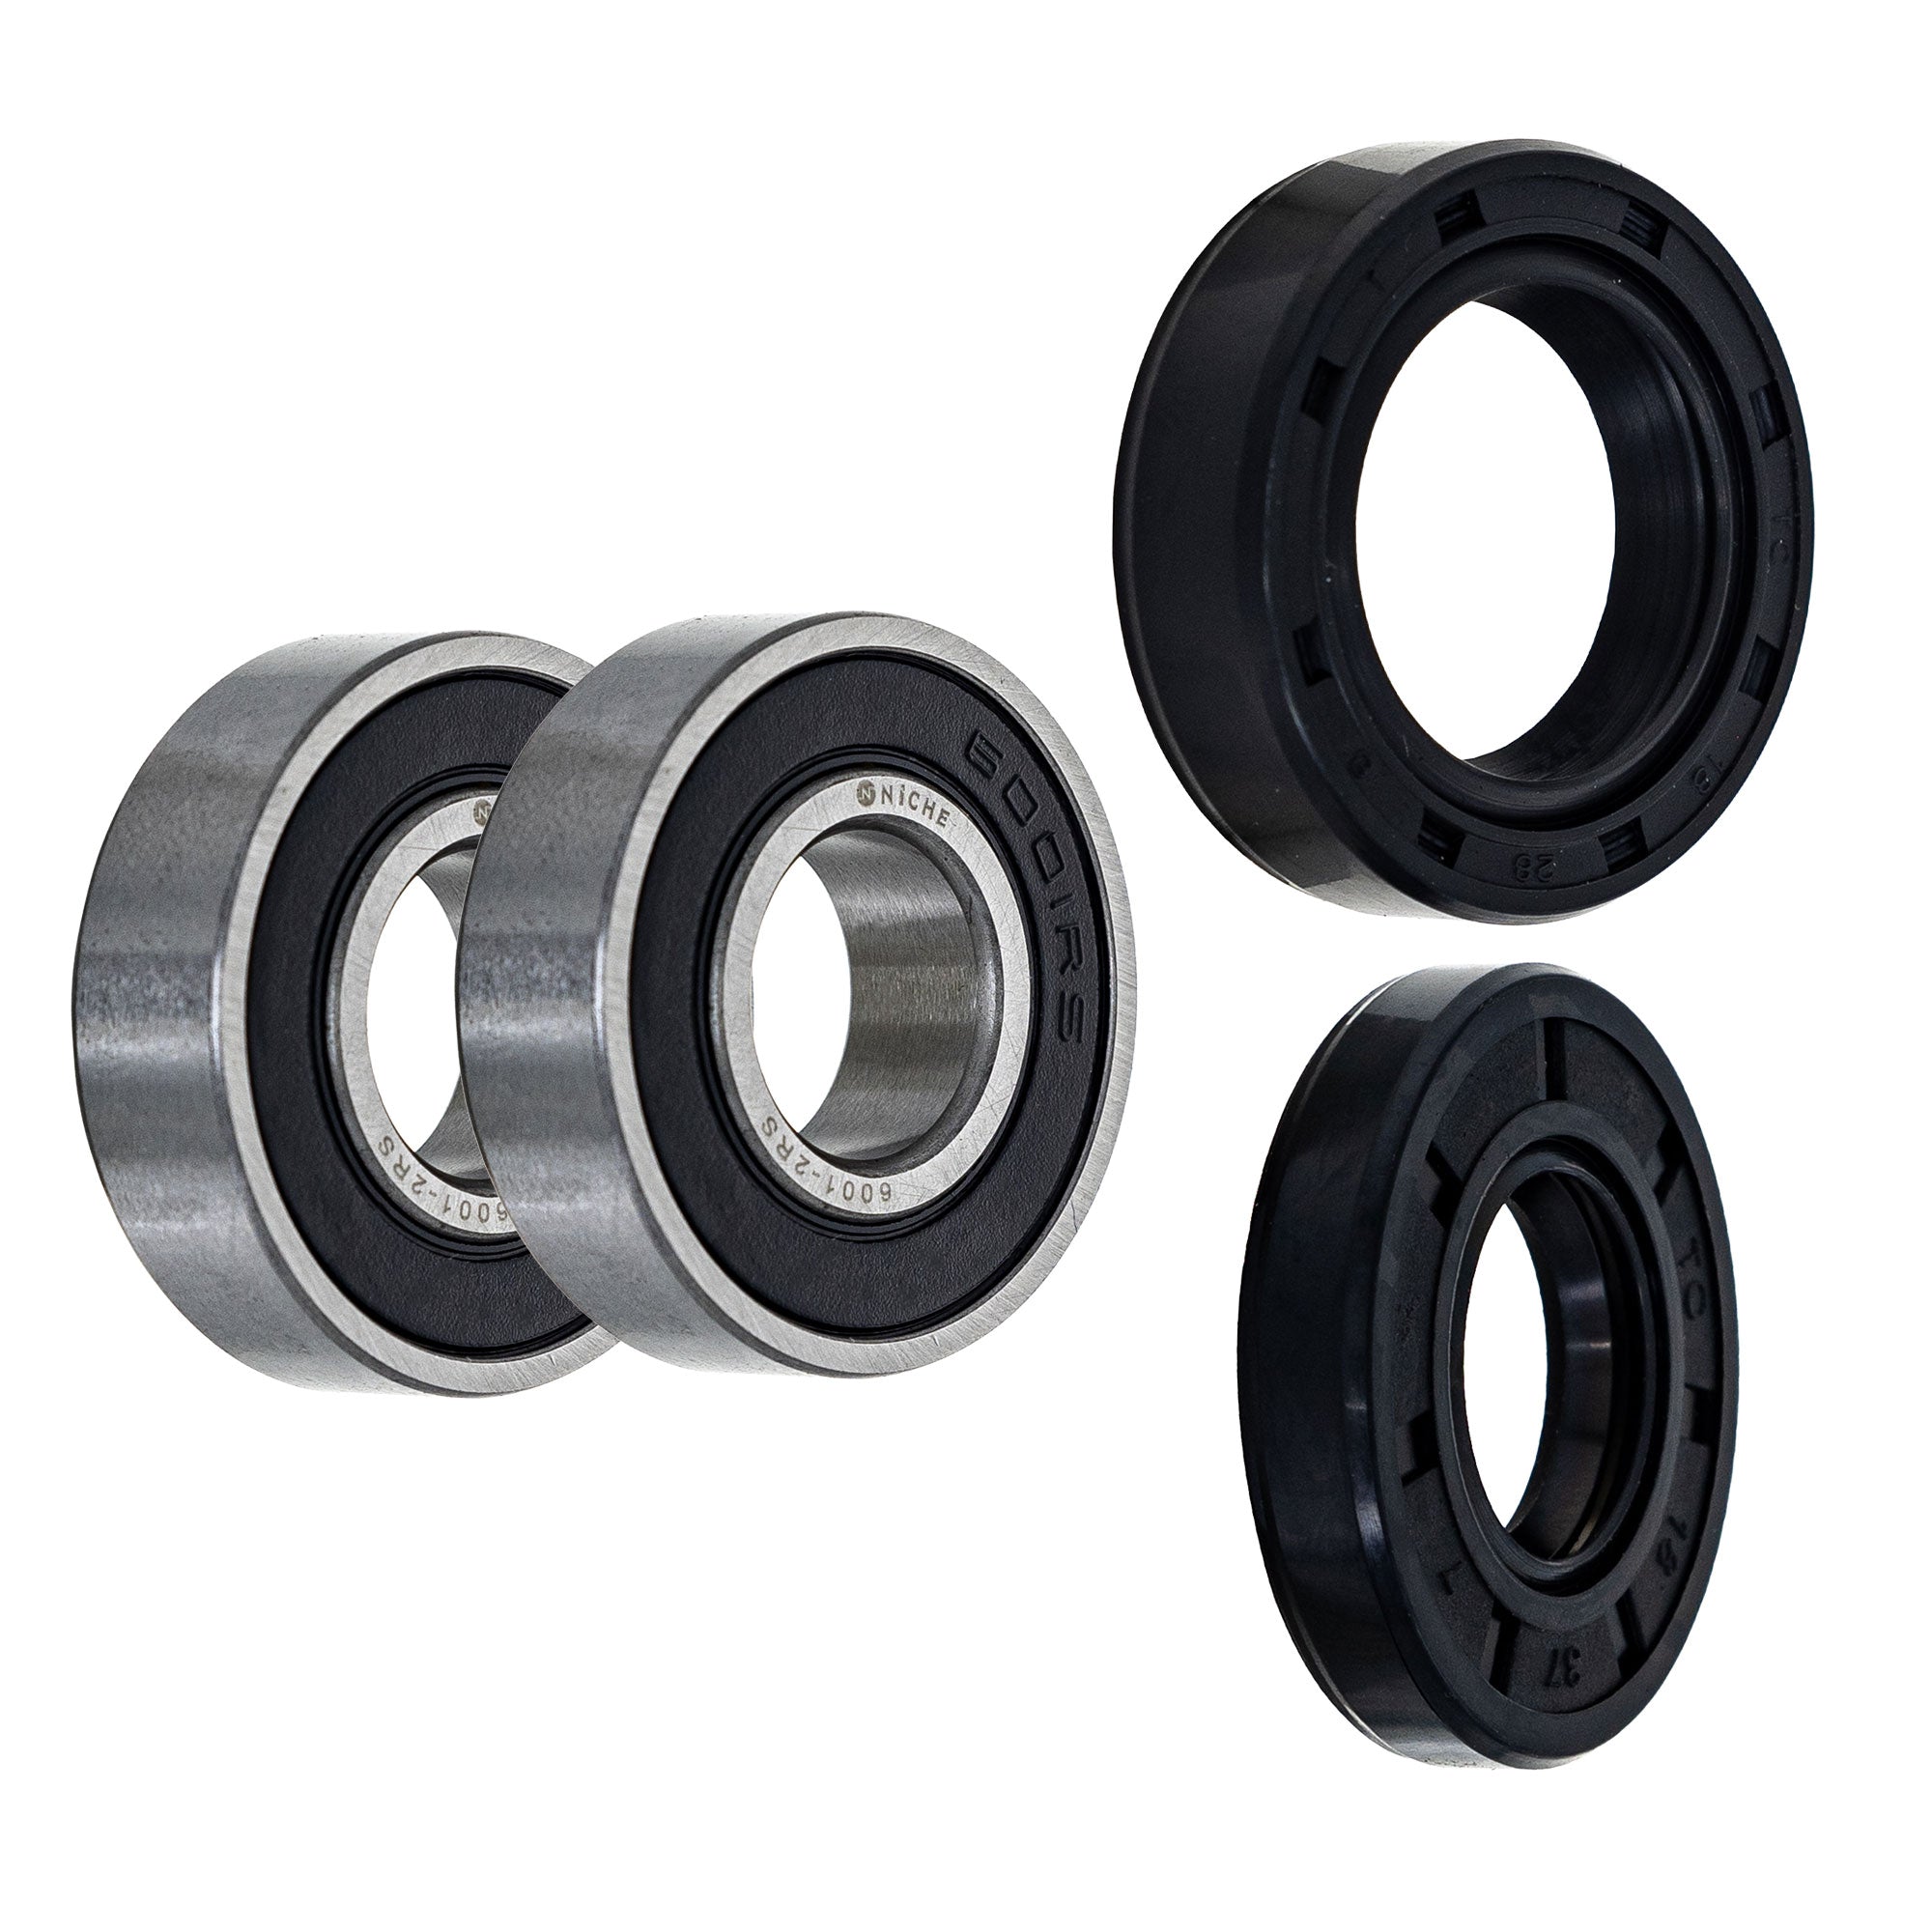 Wheel Bearing Seal Kit for zOTHER Ref No TTR125LE TTR125 NICHE MK1008952